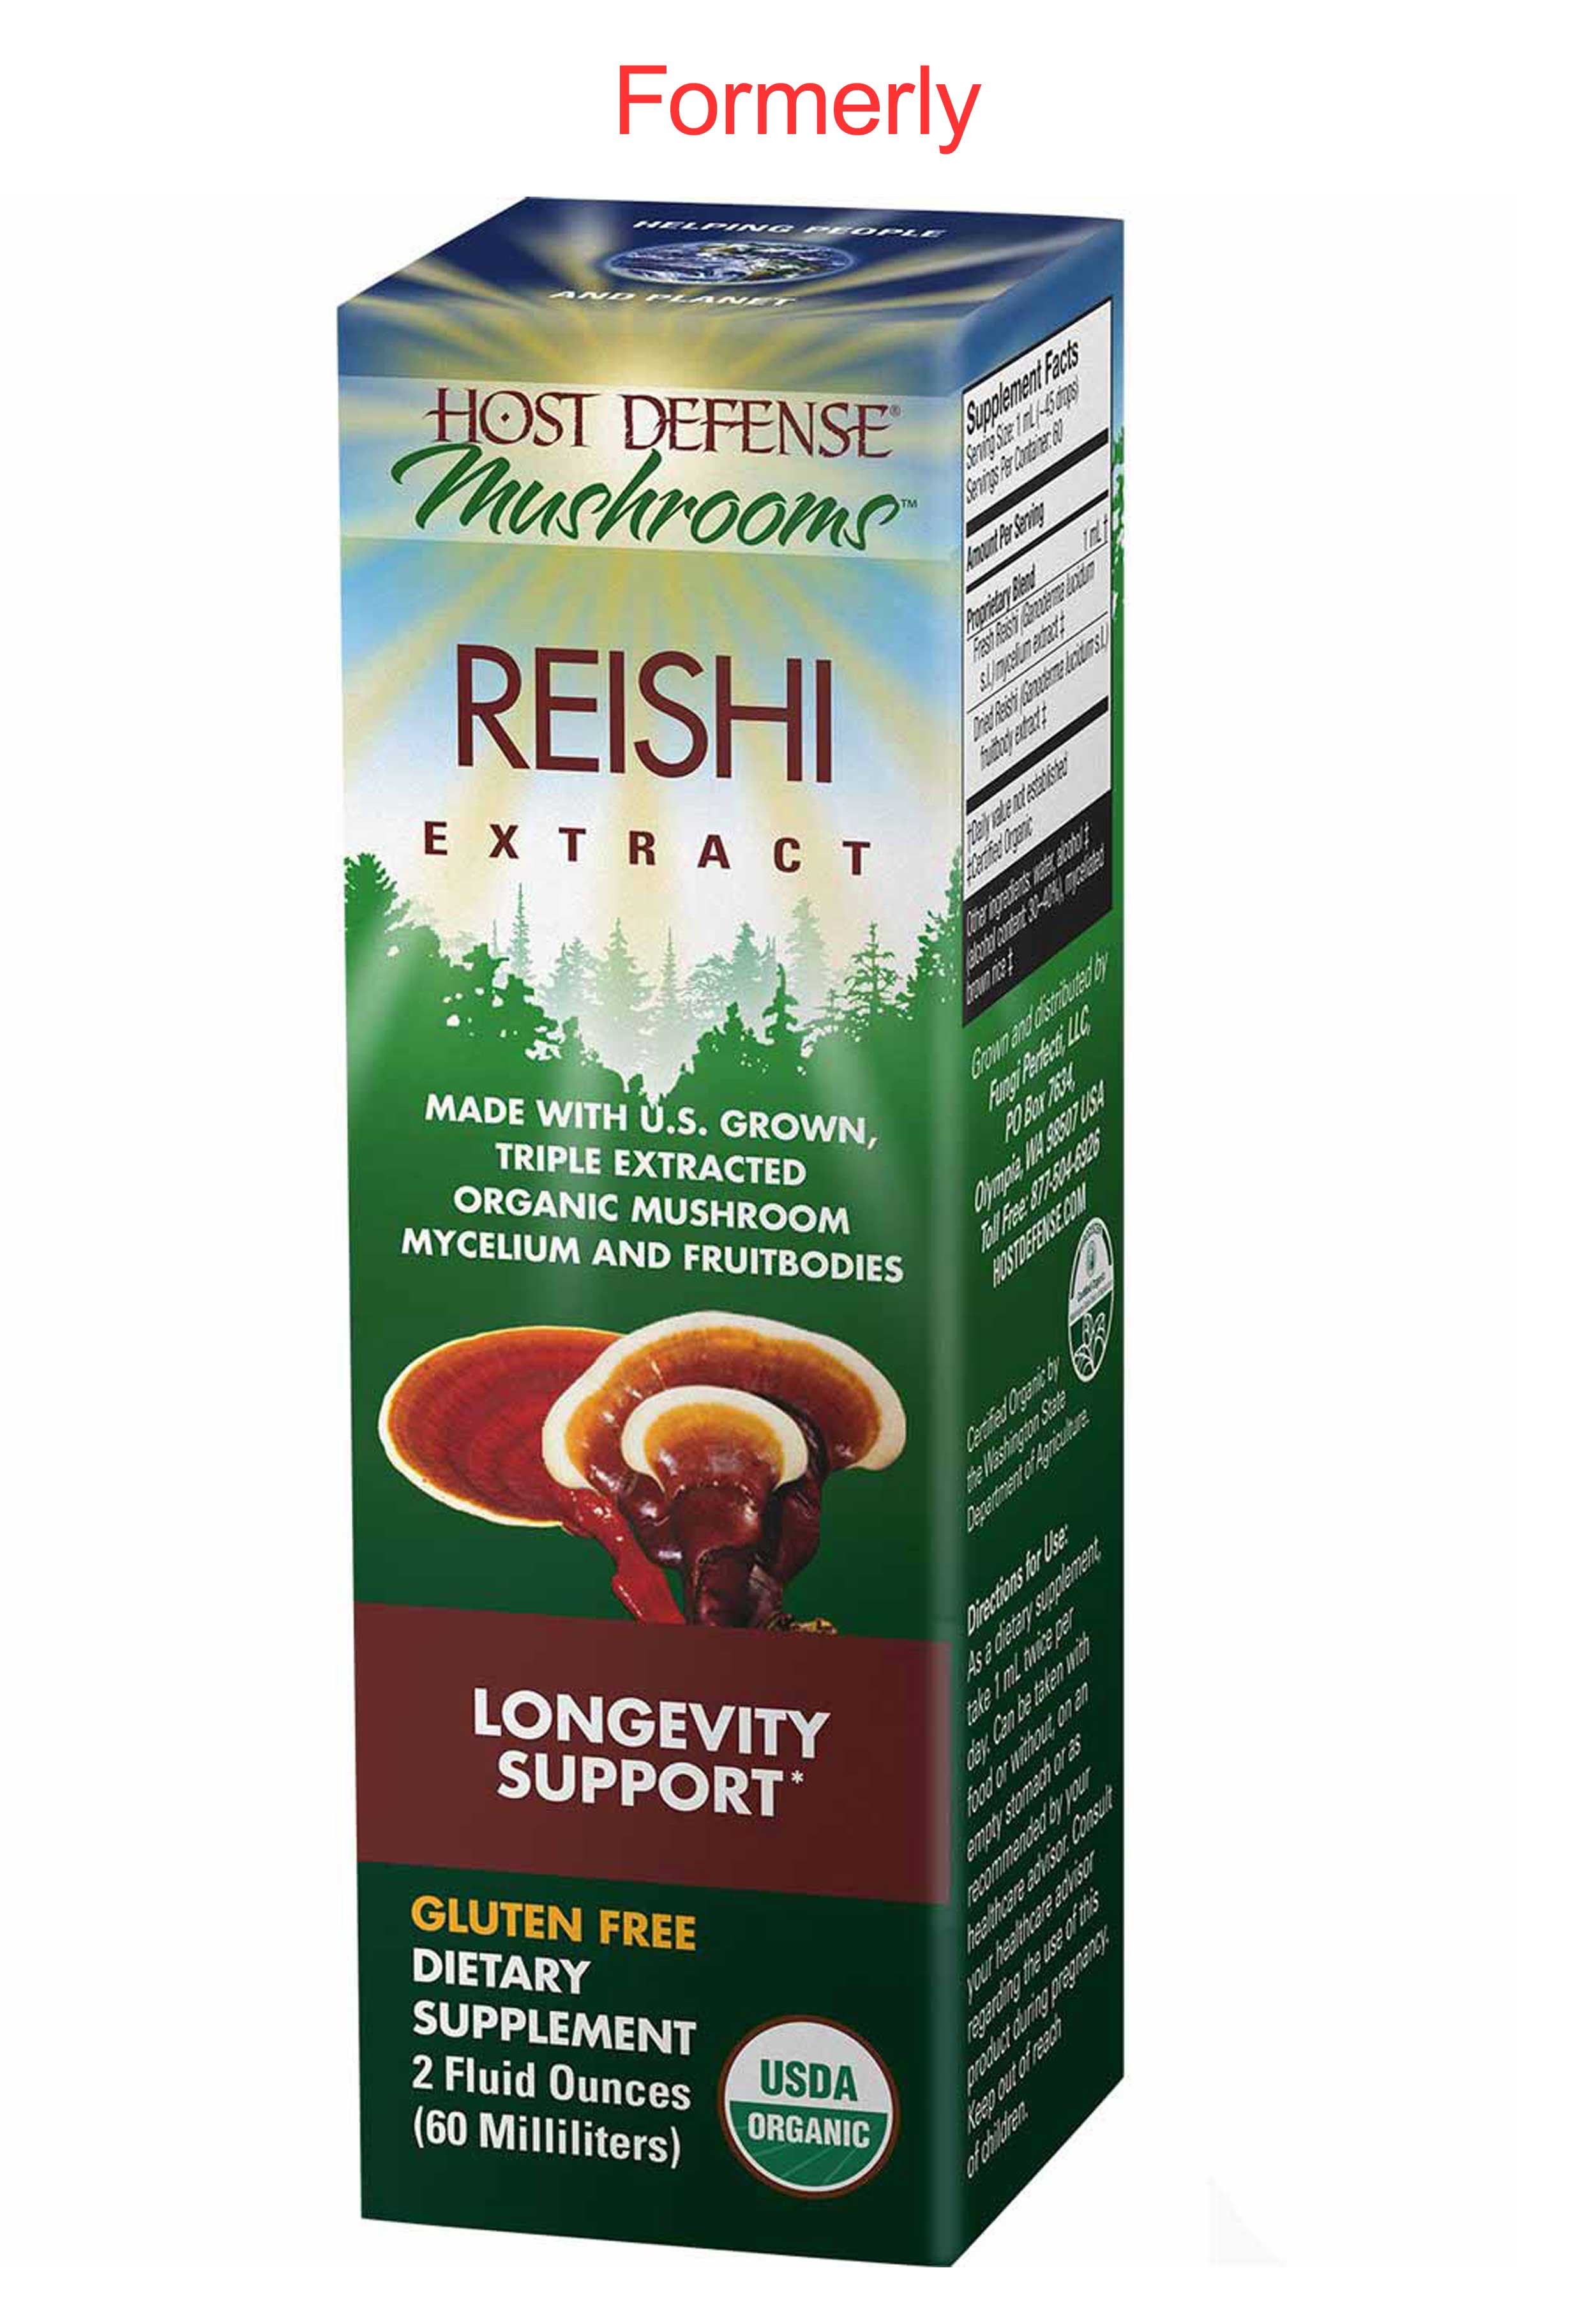 Host Defense Reishi Extract Formerly